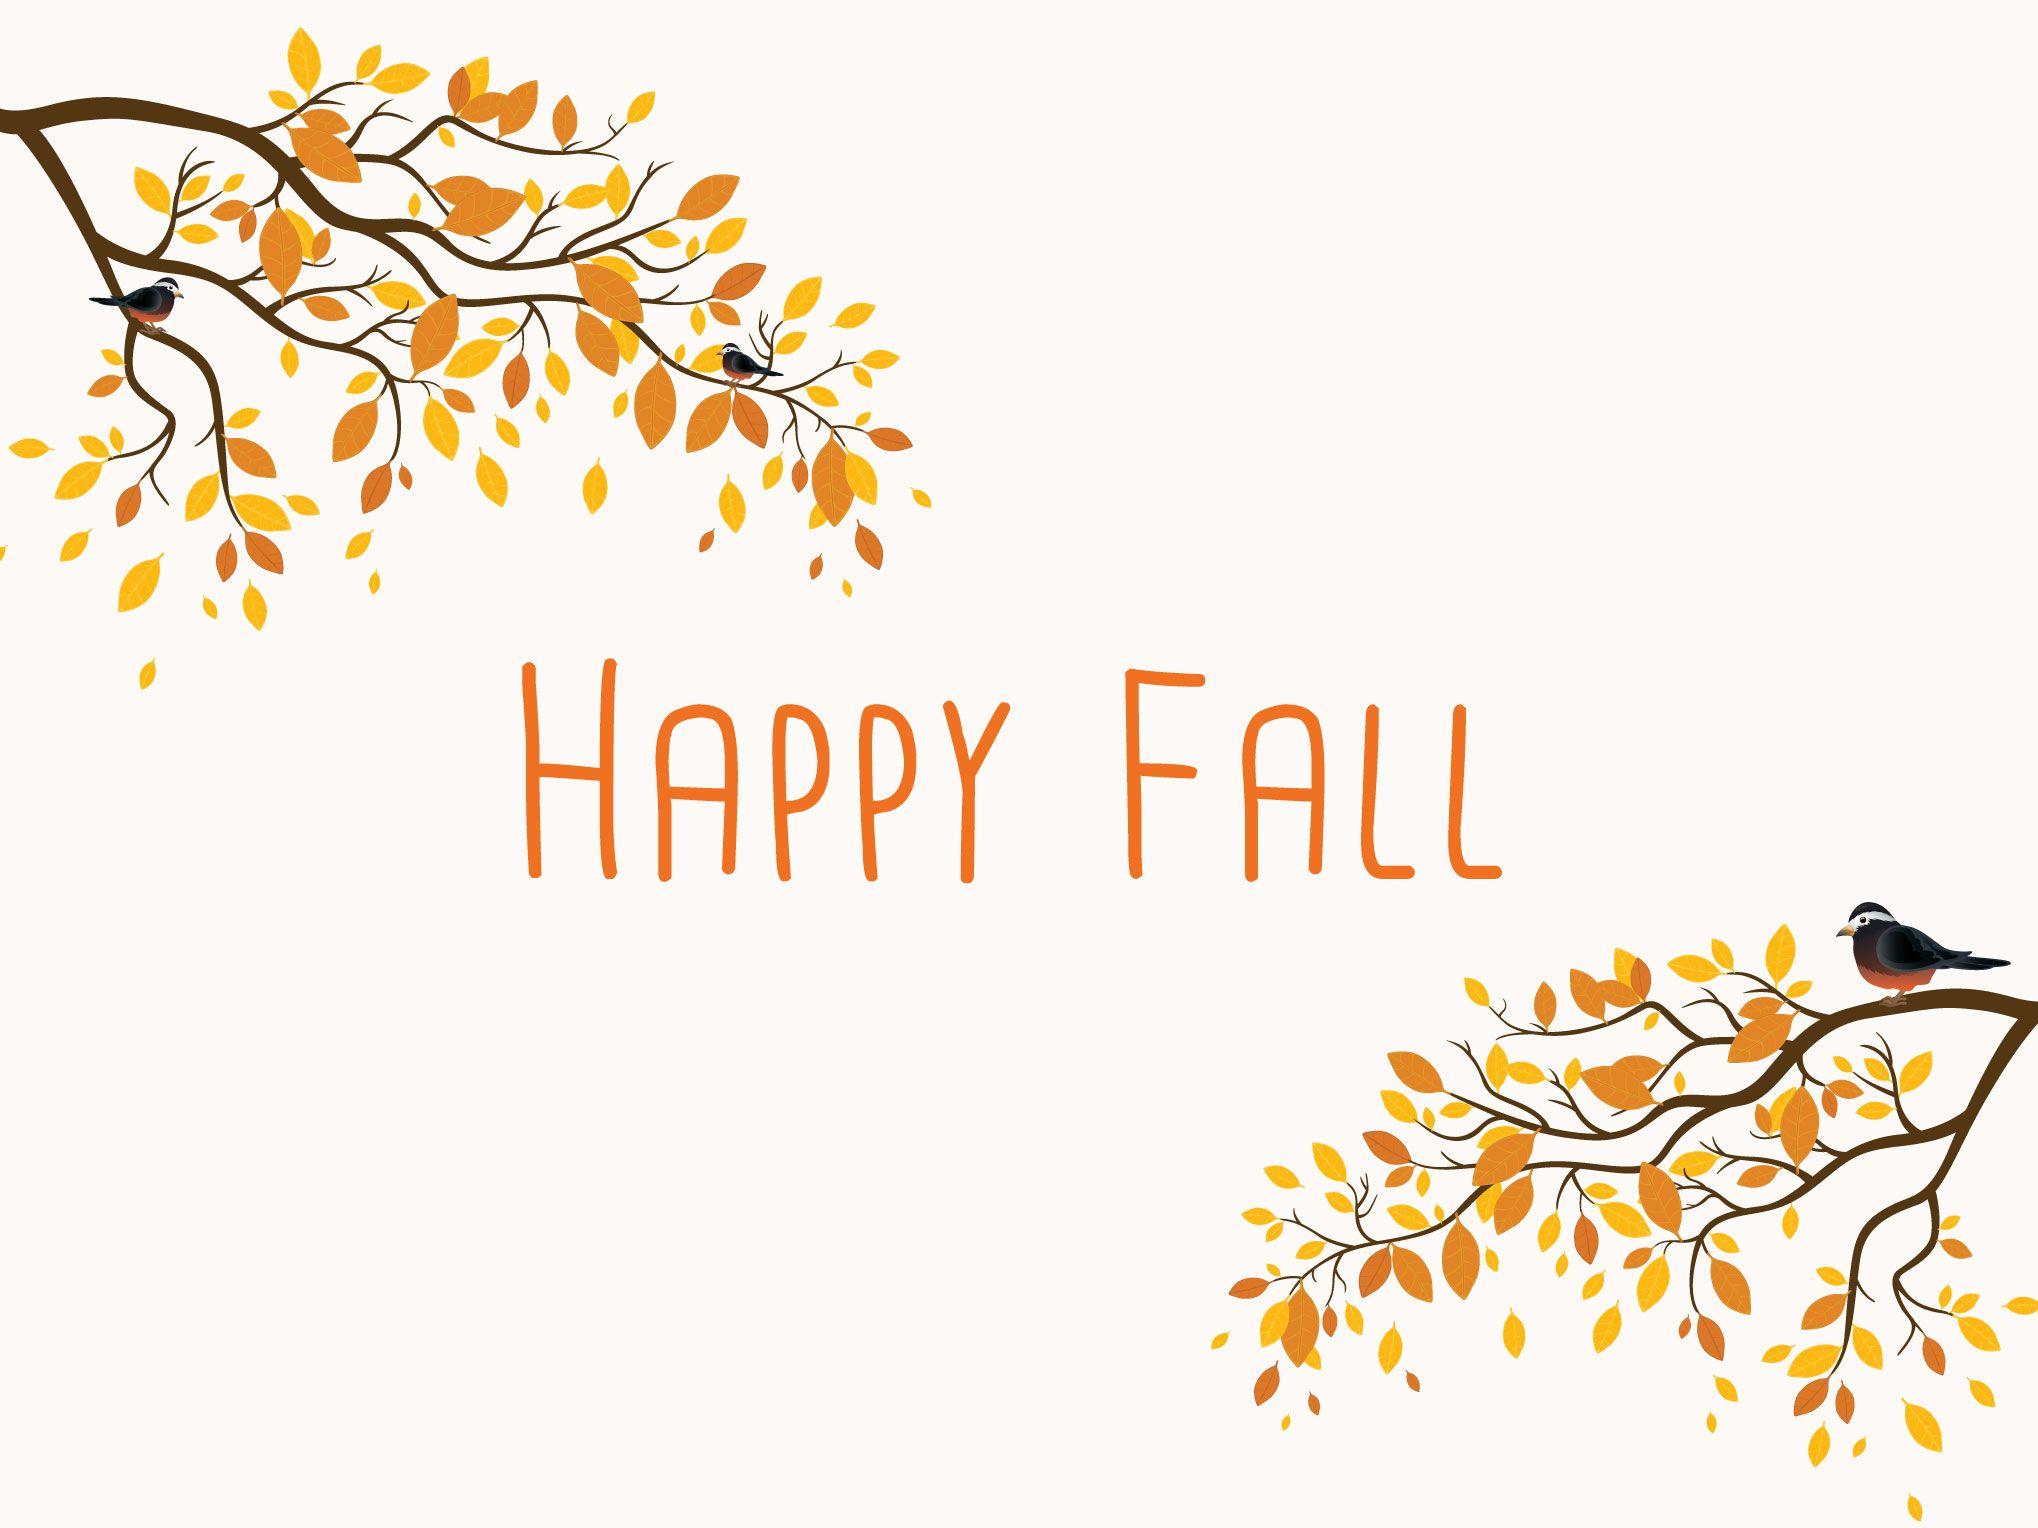 Happy Fall Wallpapers - Top Free Happy